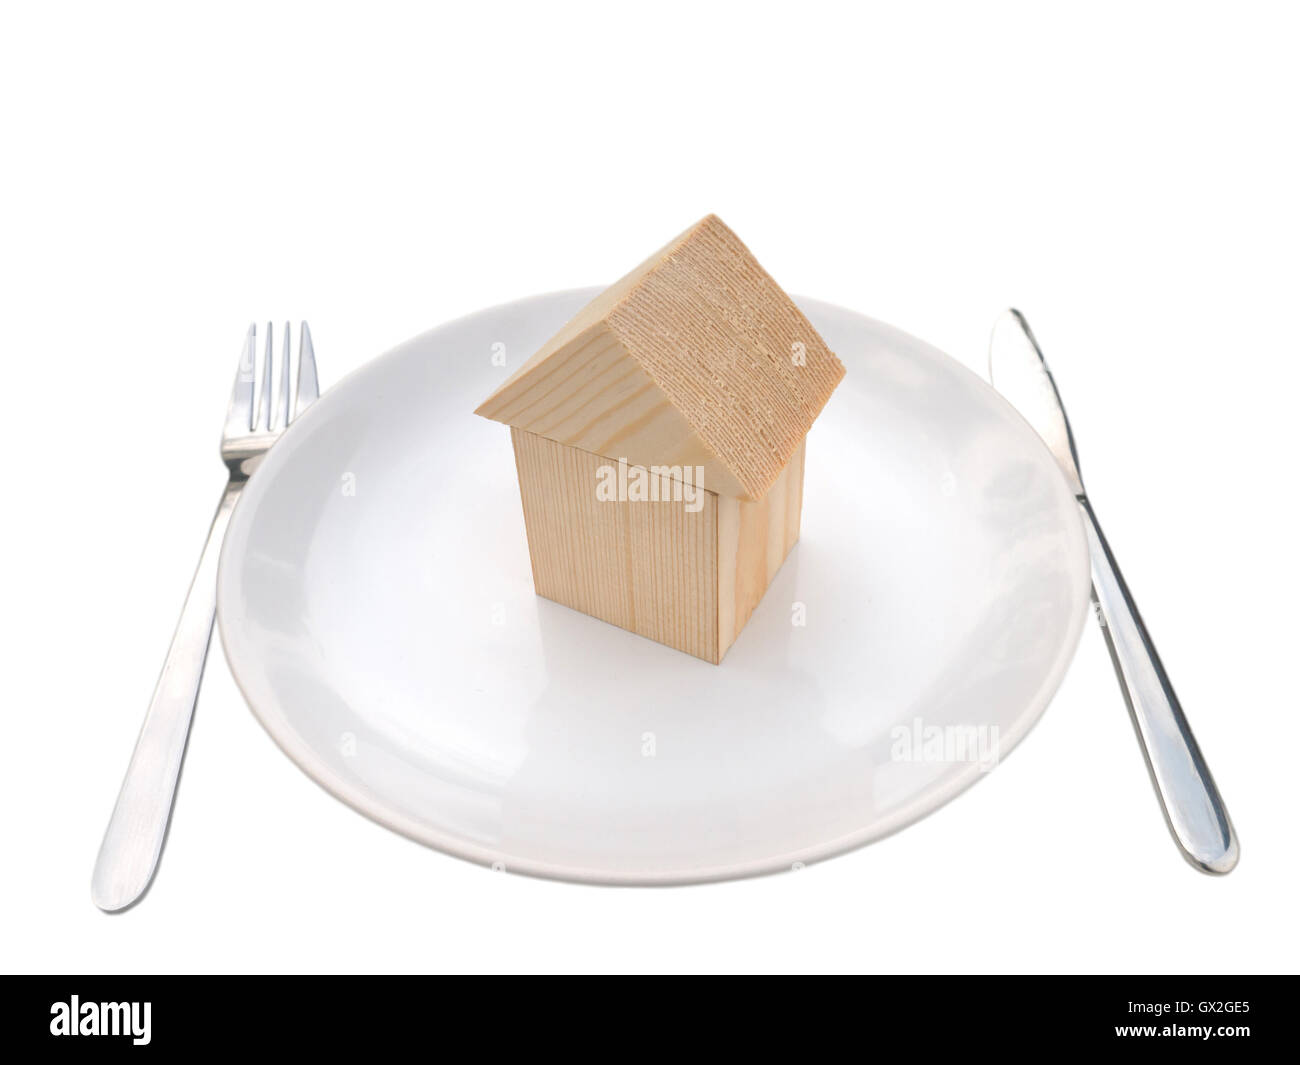 Wooden house of building blocks on the plate with fork and knife isolated on white Stock Photo